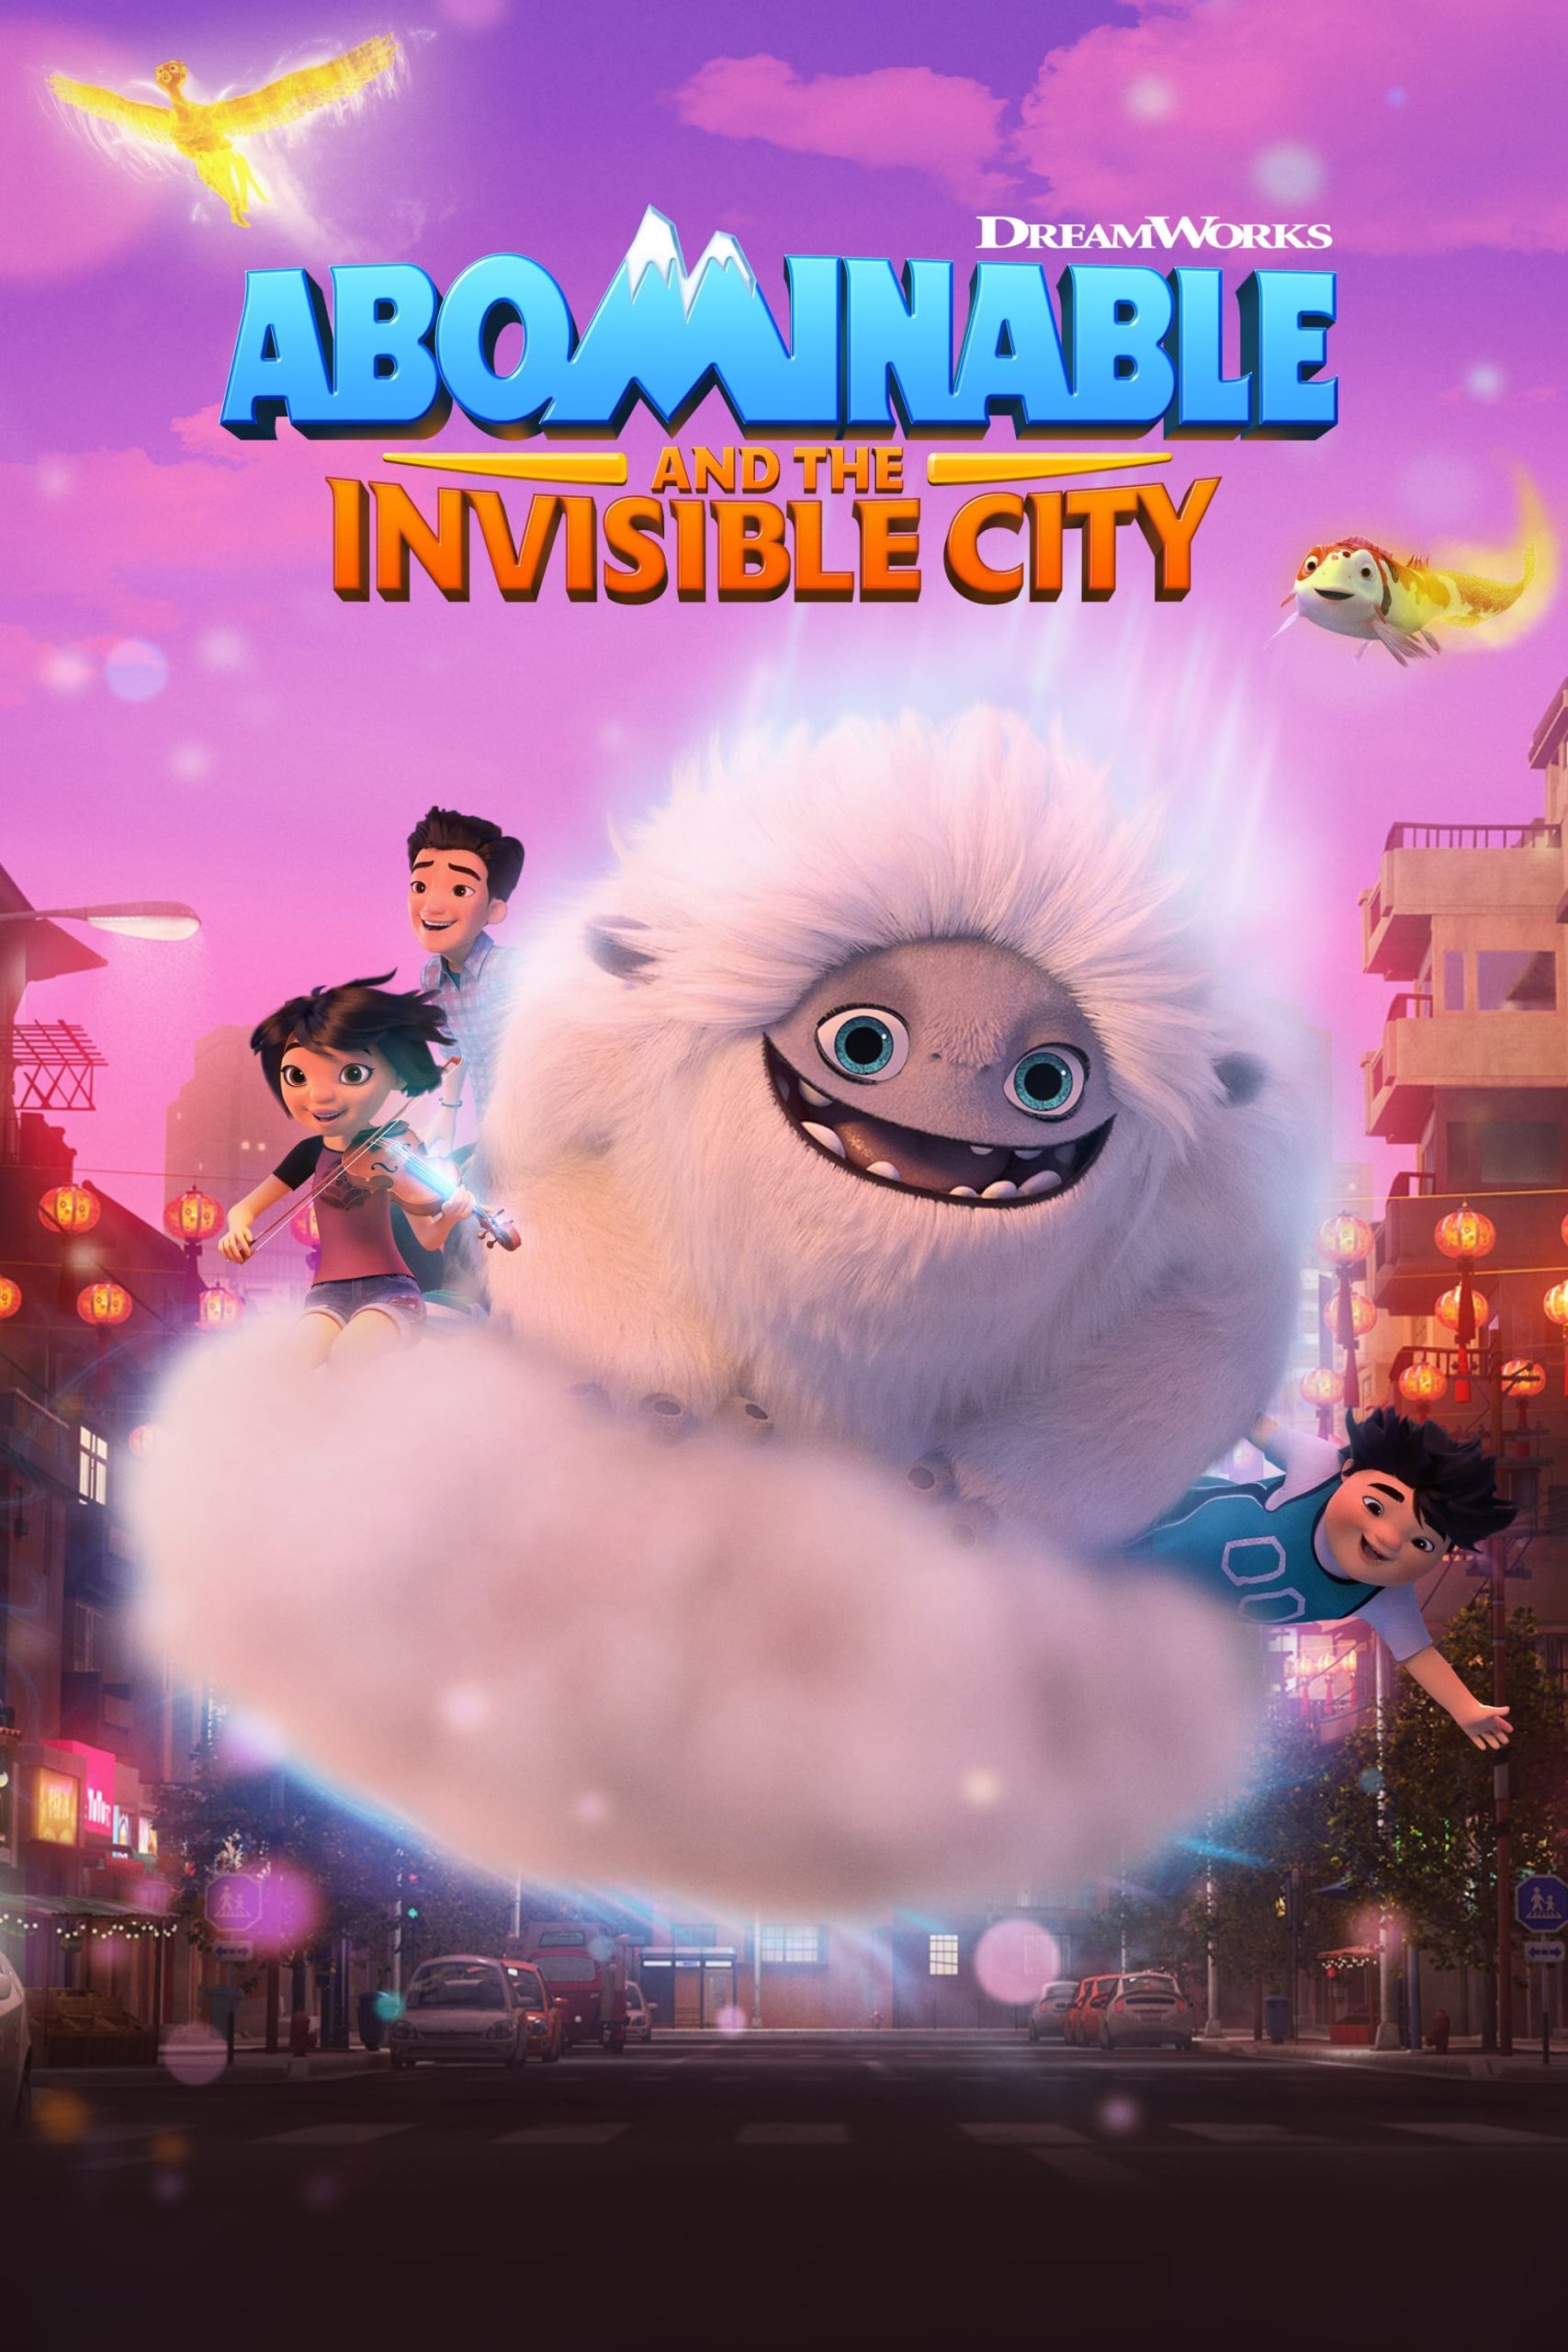 Image Abominable and the Invisible City 1